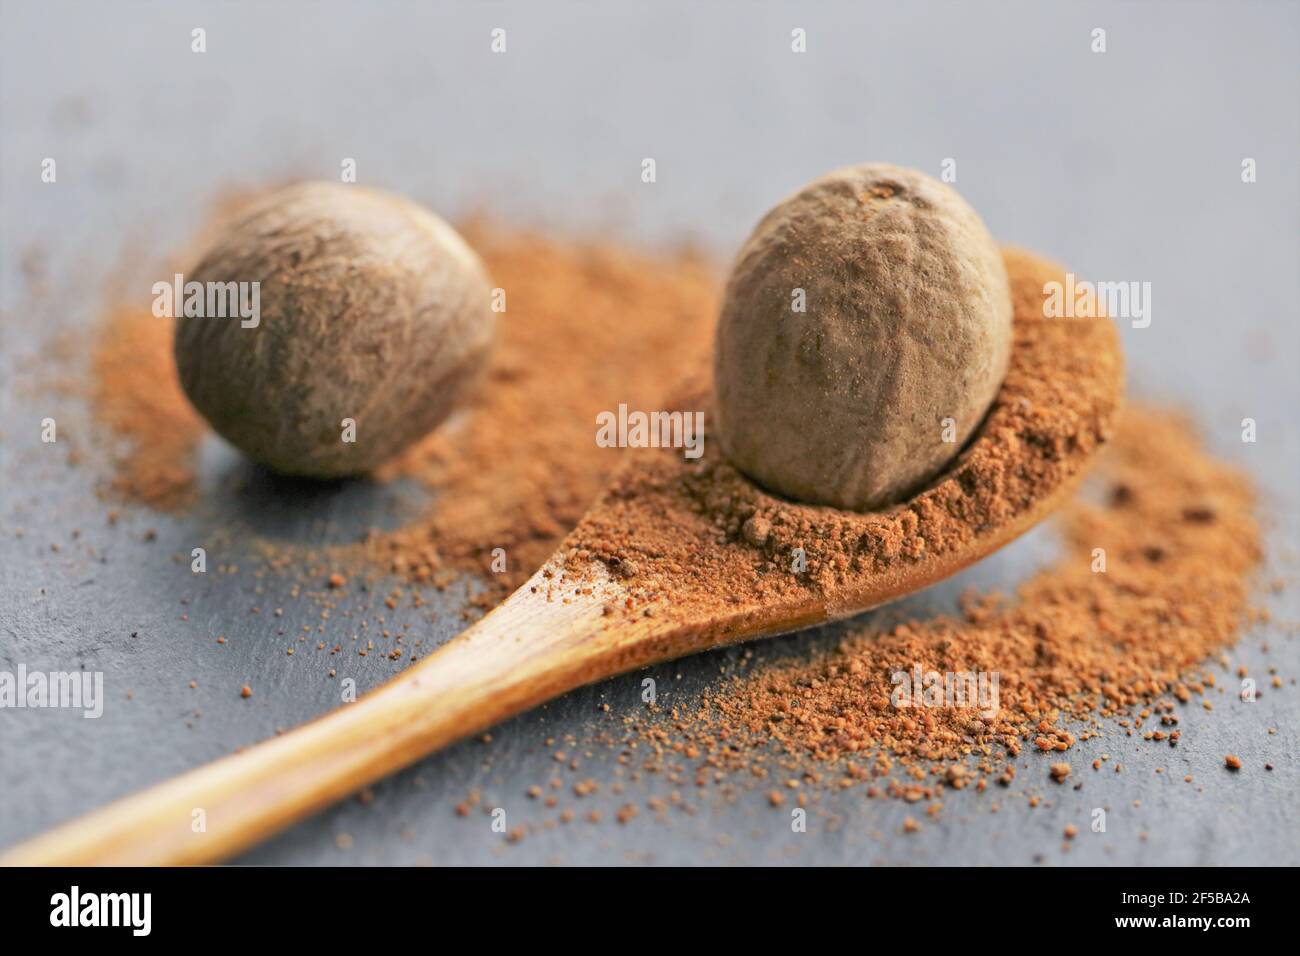 https://c8.alamy.com/comp/2F5BA2A/nutmeg-spicewhole-and-ground-nutmeg-in-a-wooden-spoon-close-up-on-a-schiffer-backgroundspices-and-herbs-conceptfood-ingredientspices-for-meat-2F5BA2A.jpg